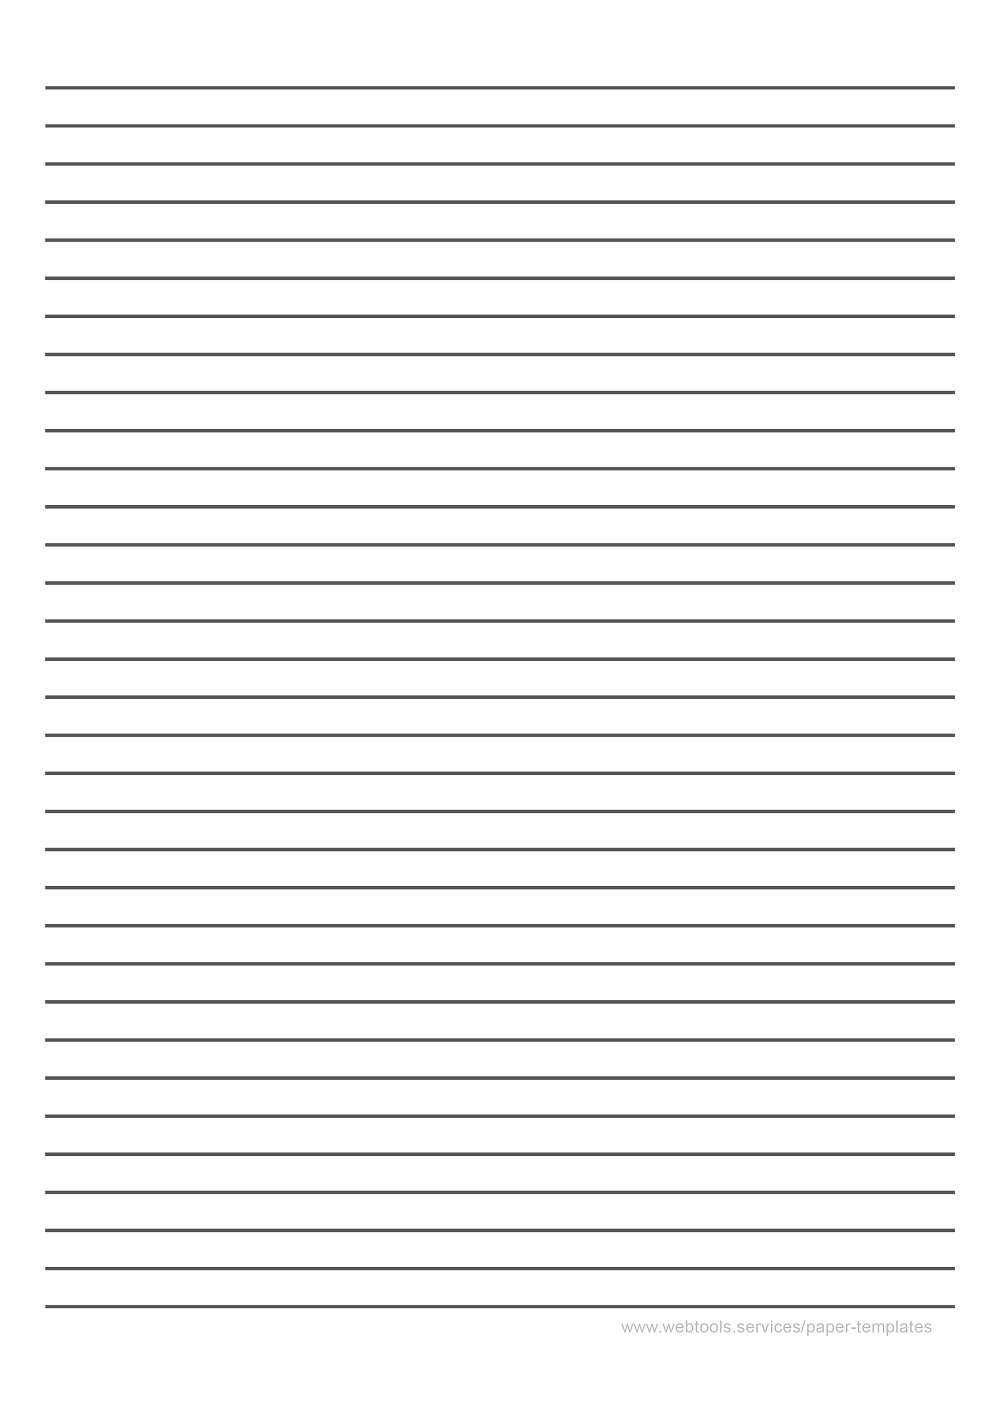 Printable Black Lined Paper Template With 8 mm Line Height